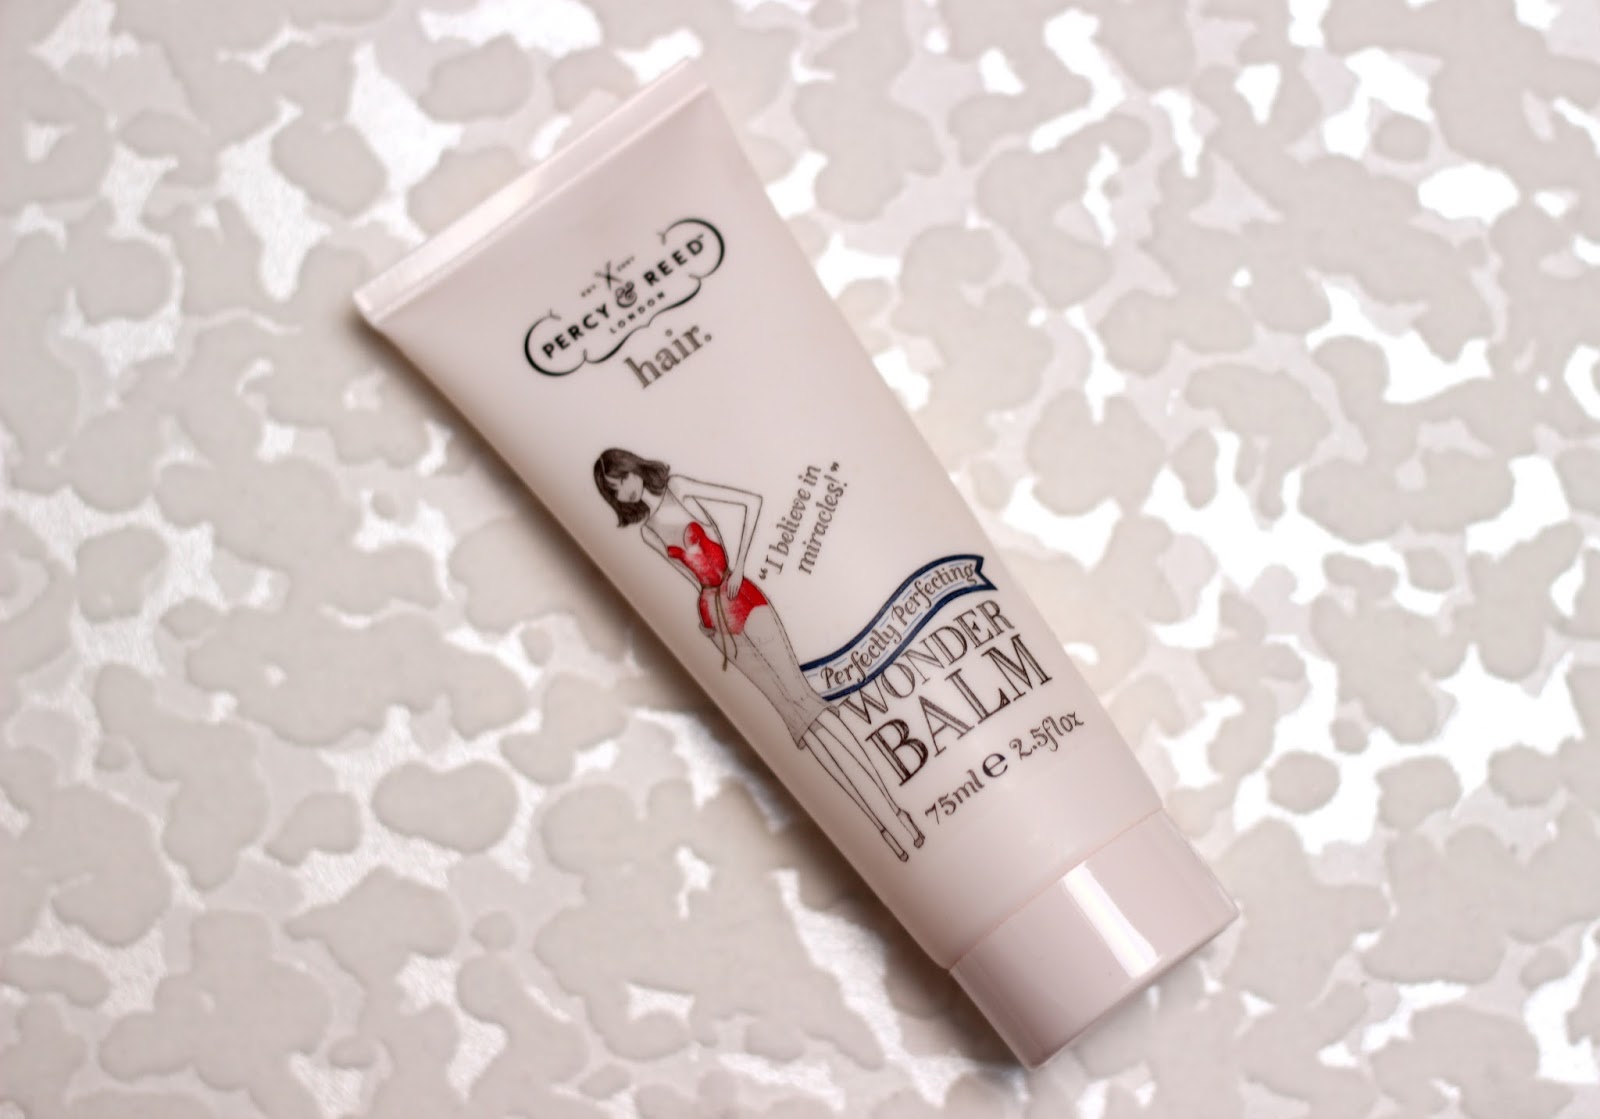 Percy & Reed Wonder Balm Review